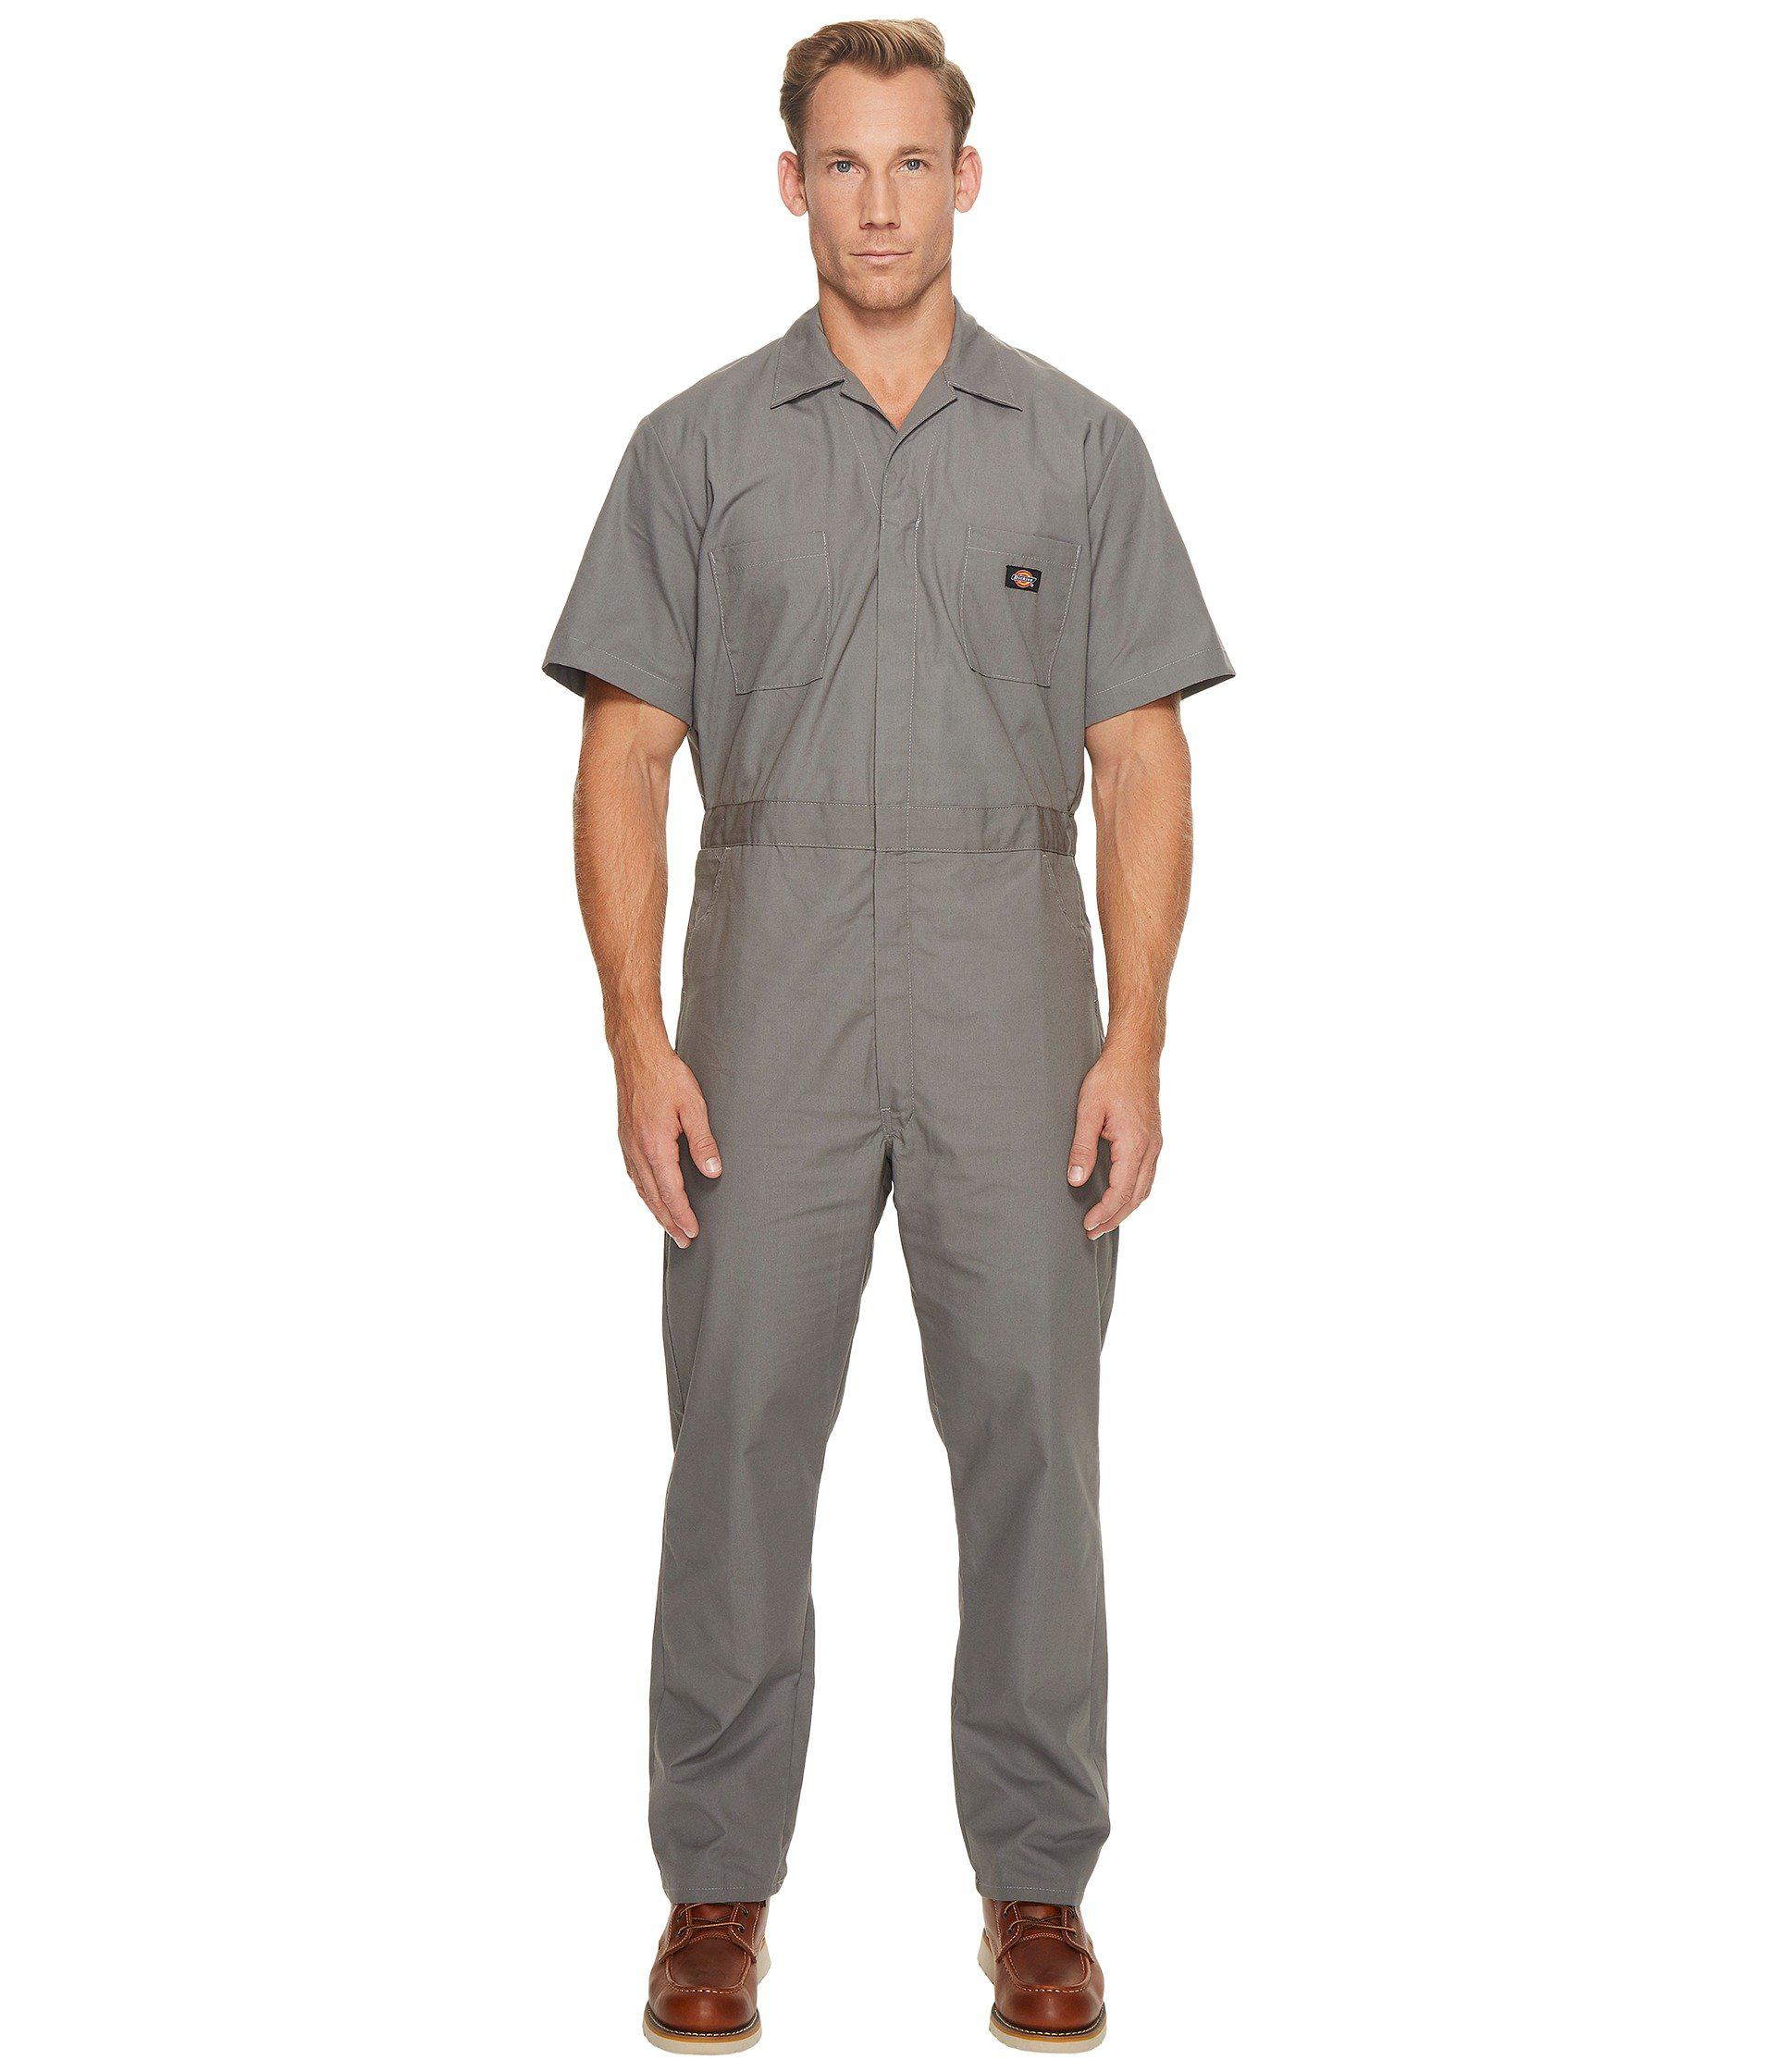 Dickies Synthetic Short Sleeve Coveralls in Gray for Men - Lyst